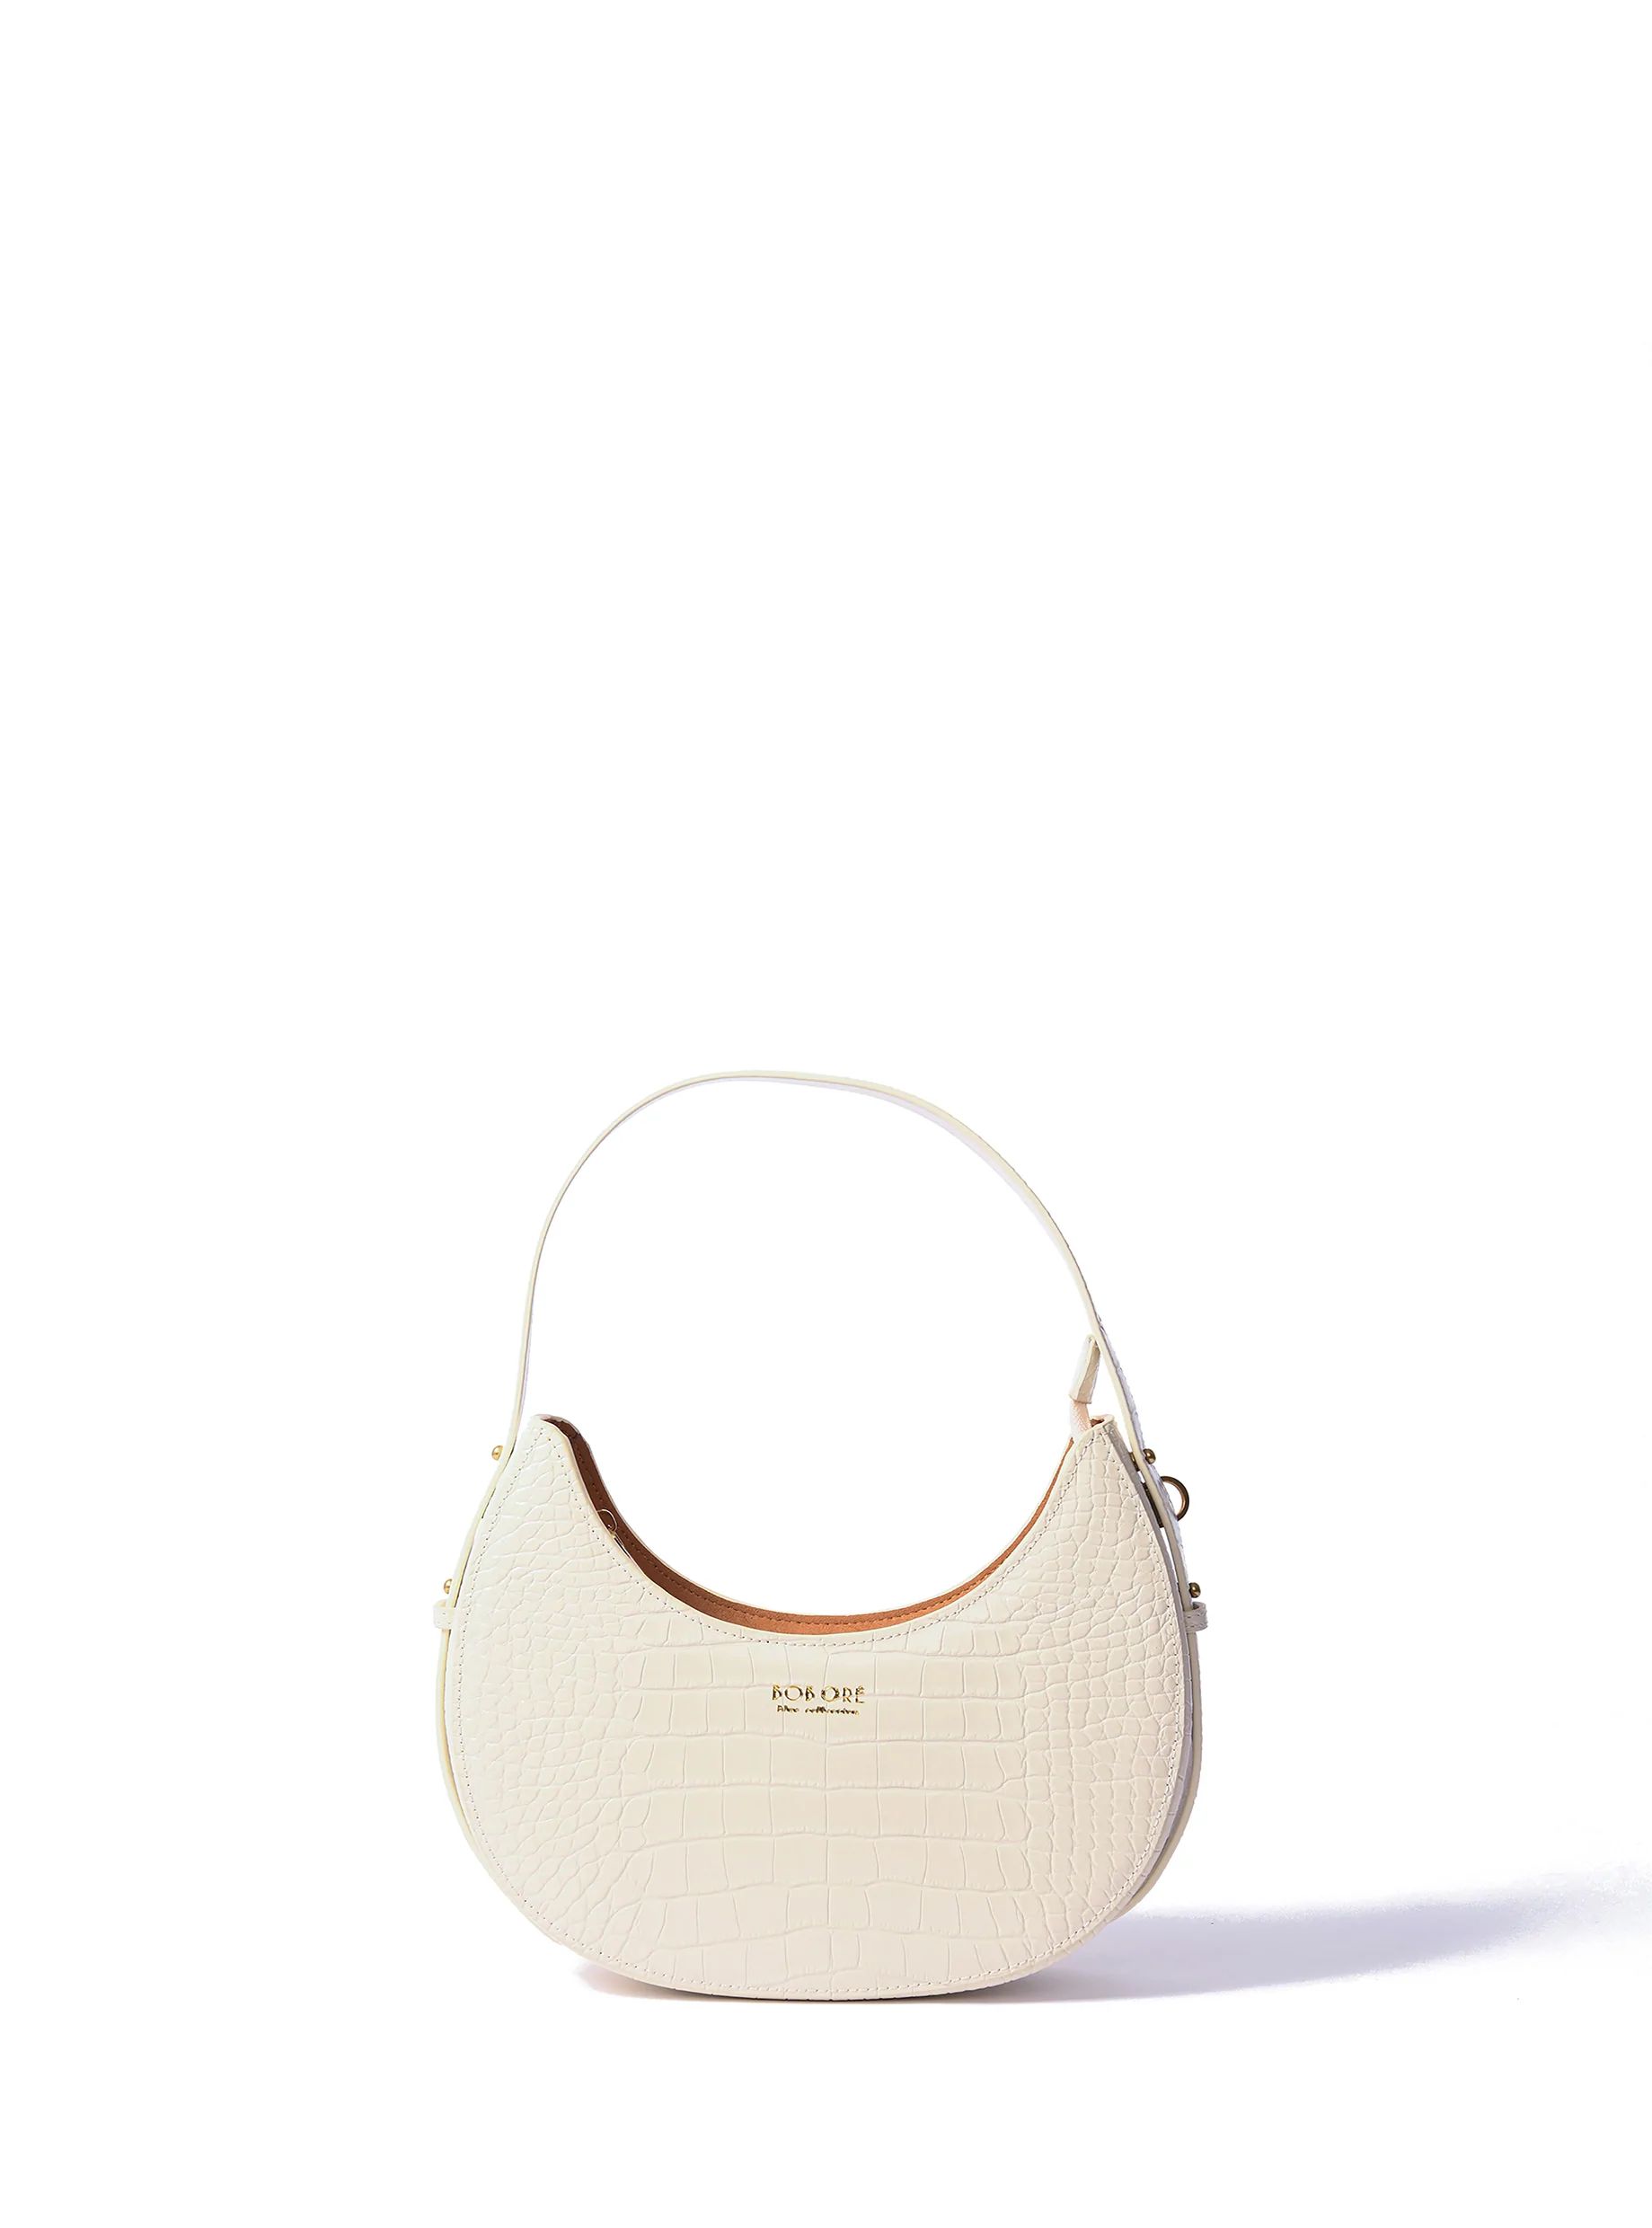 Naomi Leather Moon Bag with Croc-Embossed Pattern, White | Bob Ore Blue Collection